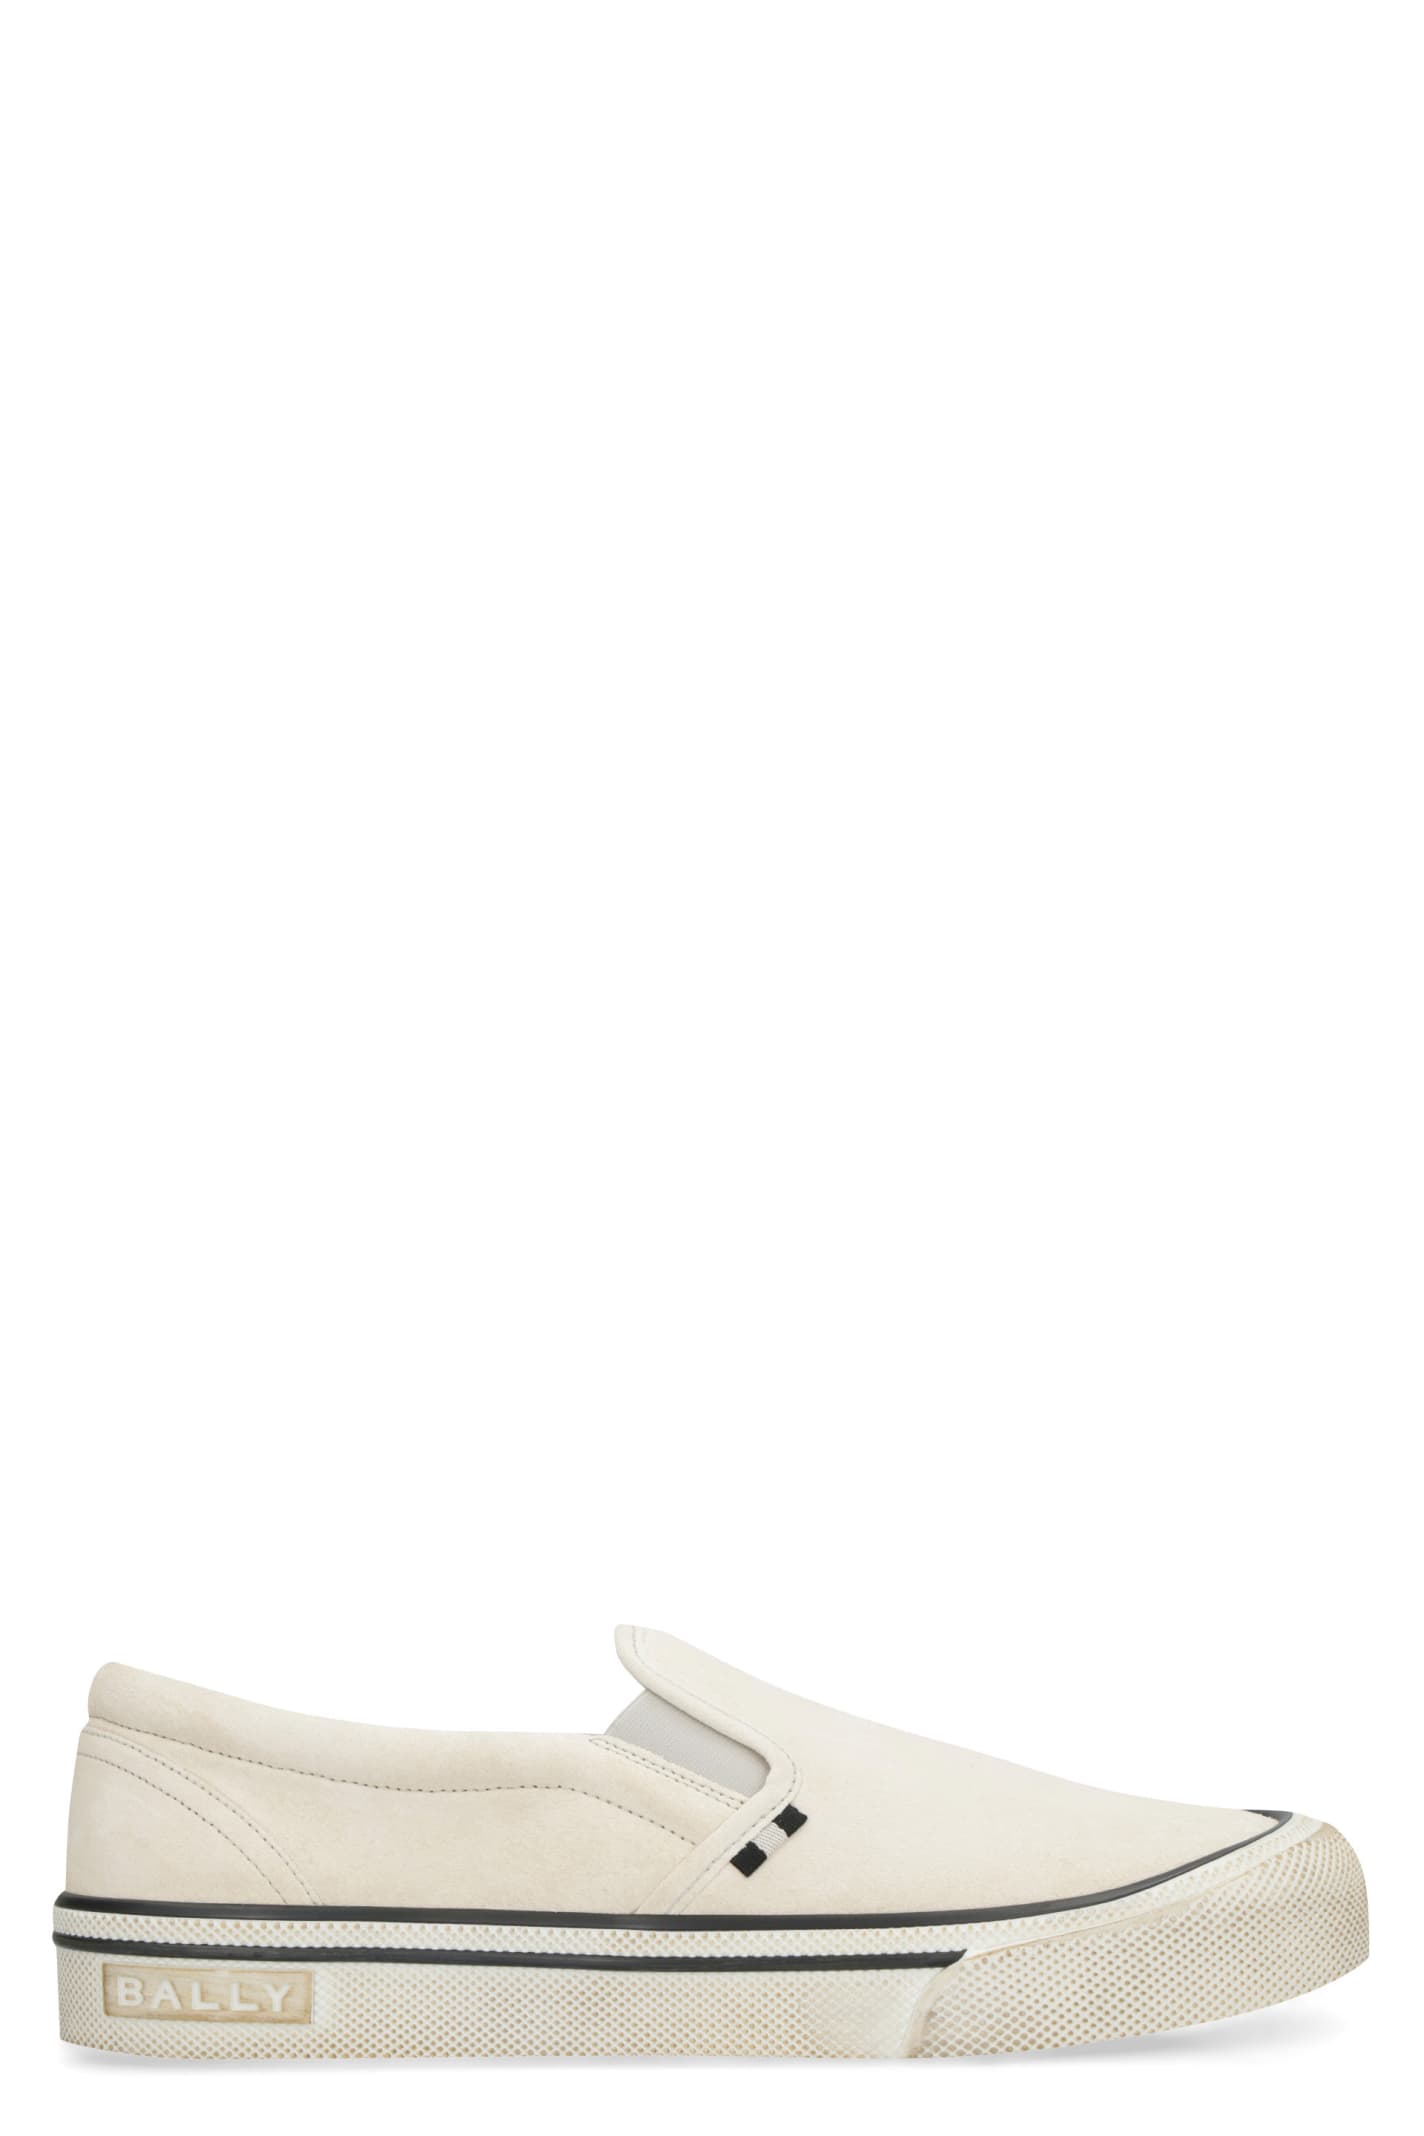 Bally Slip-on Sneakers In Suede